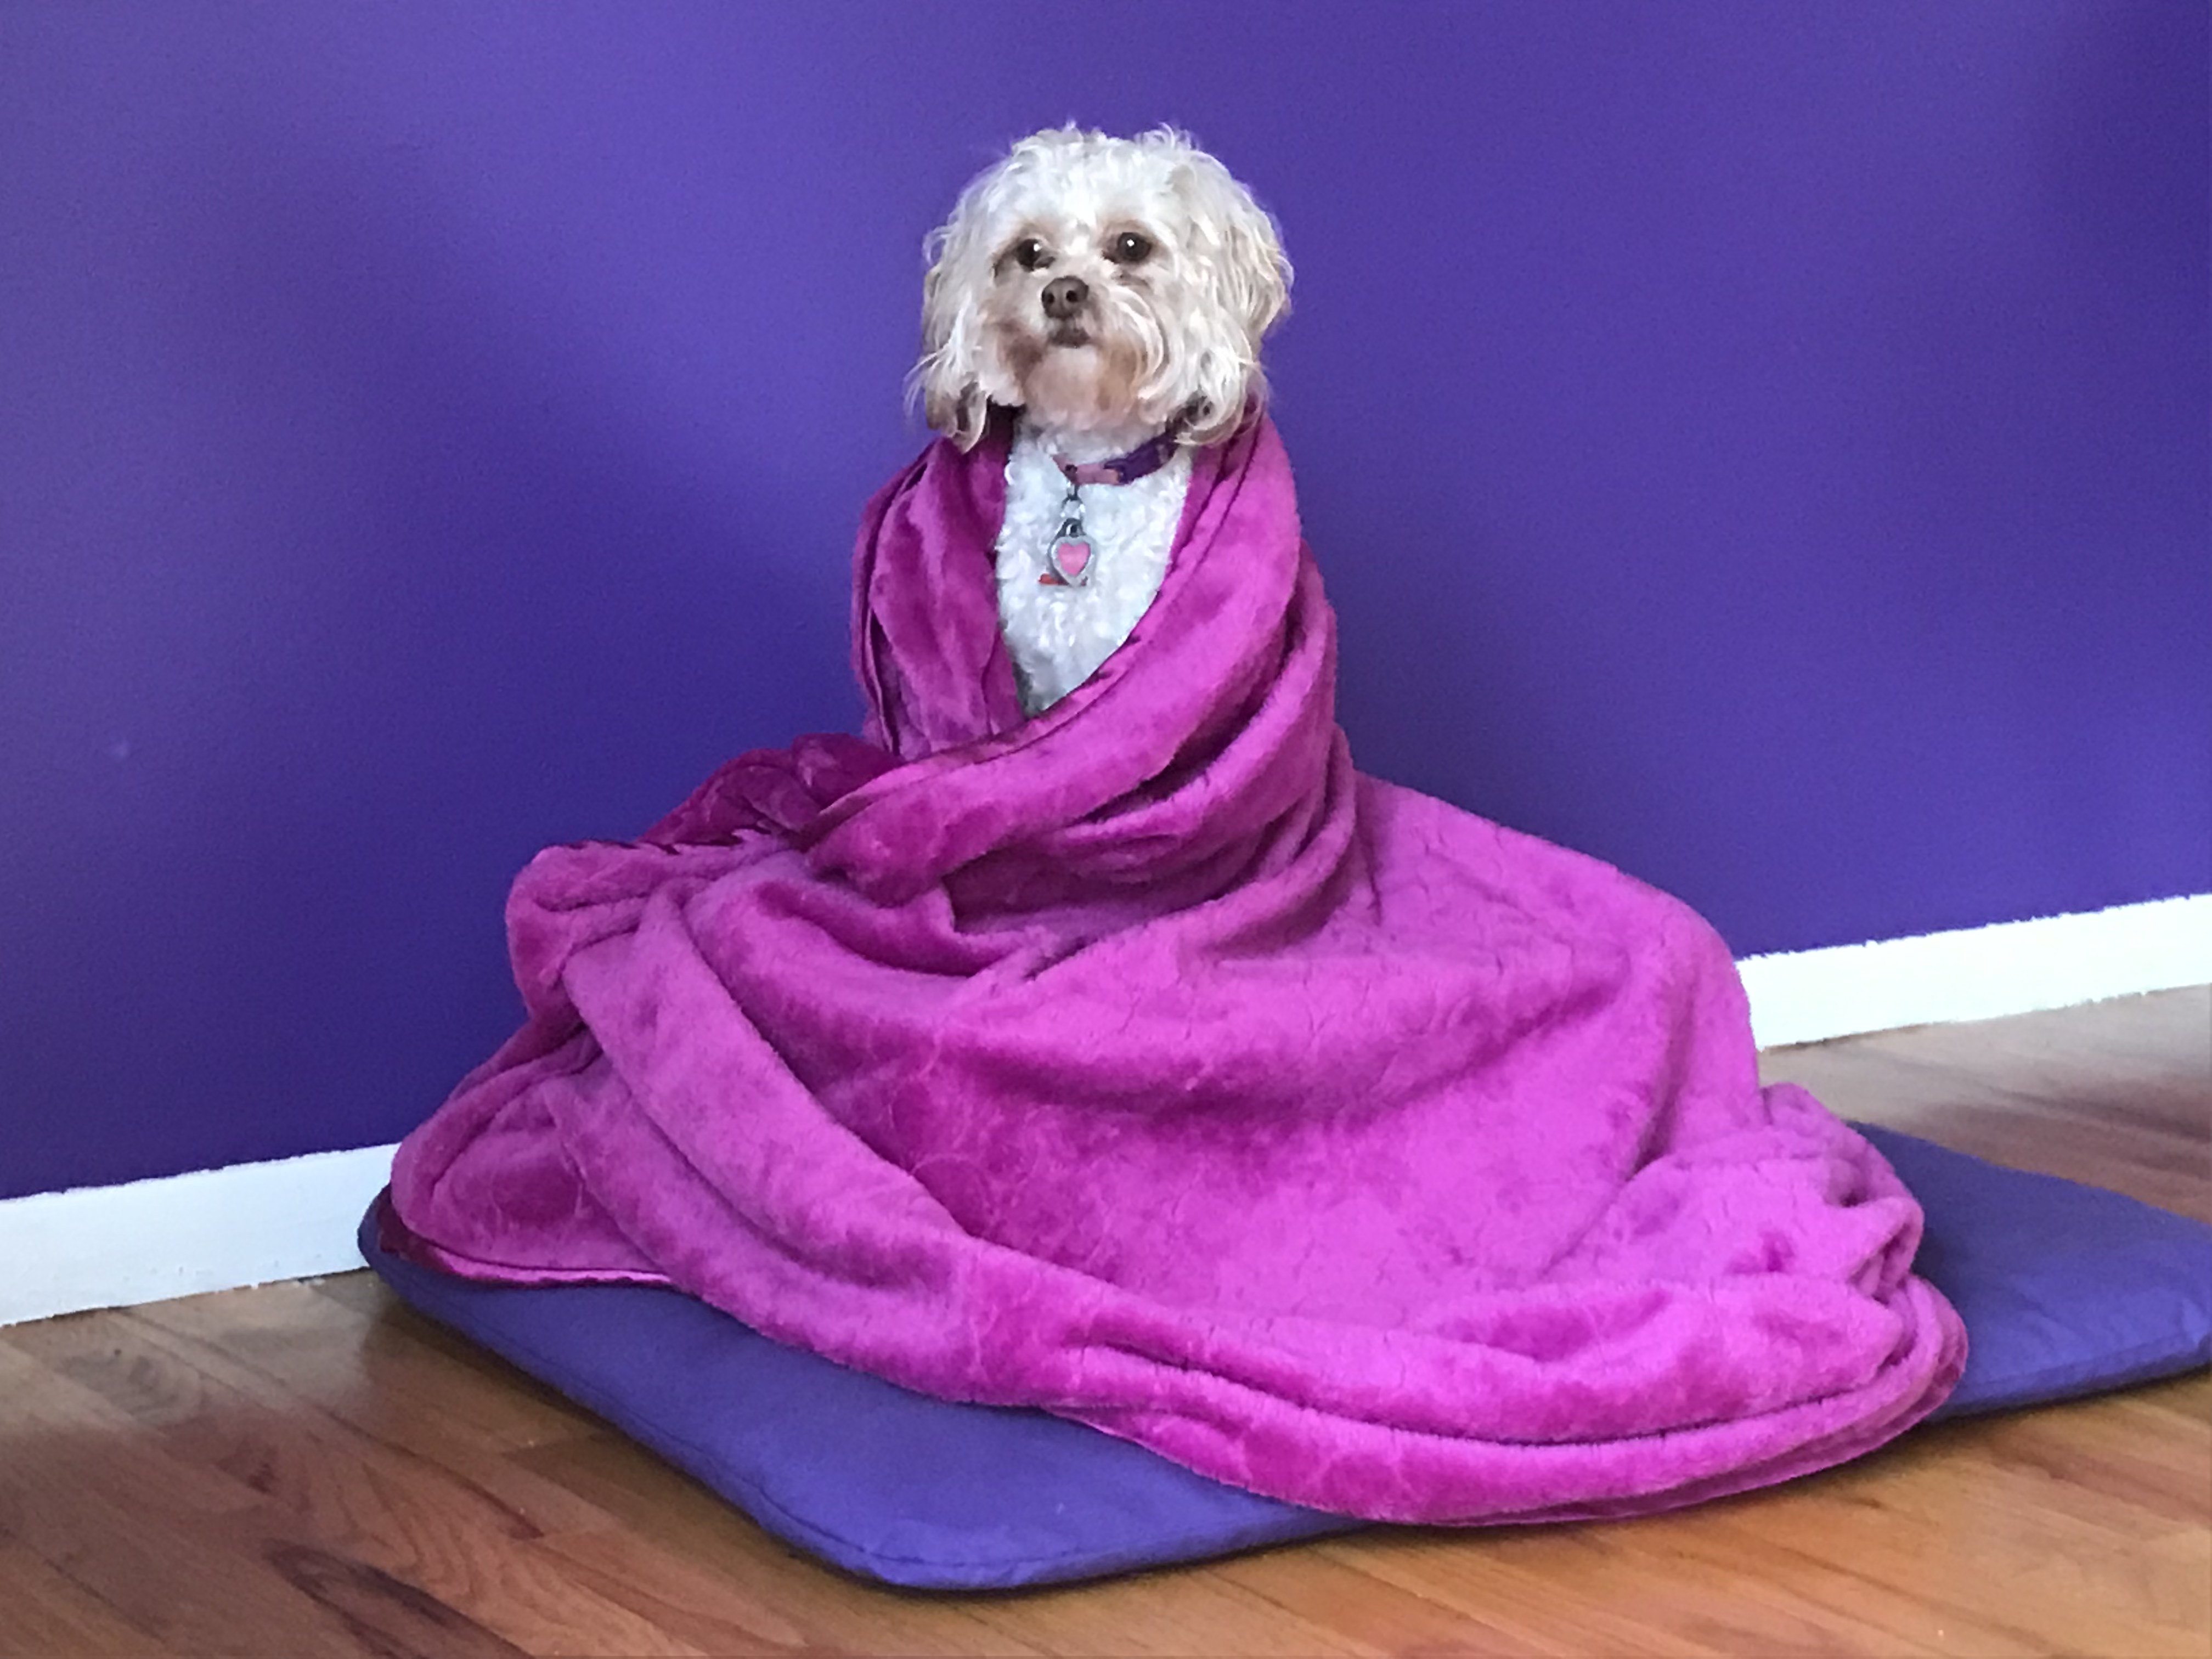 Trudi, queen of Turtle Disco, a white shihtzu-poodle mix sitting on meditation cushion adorned in pink blanket with purple wall background